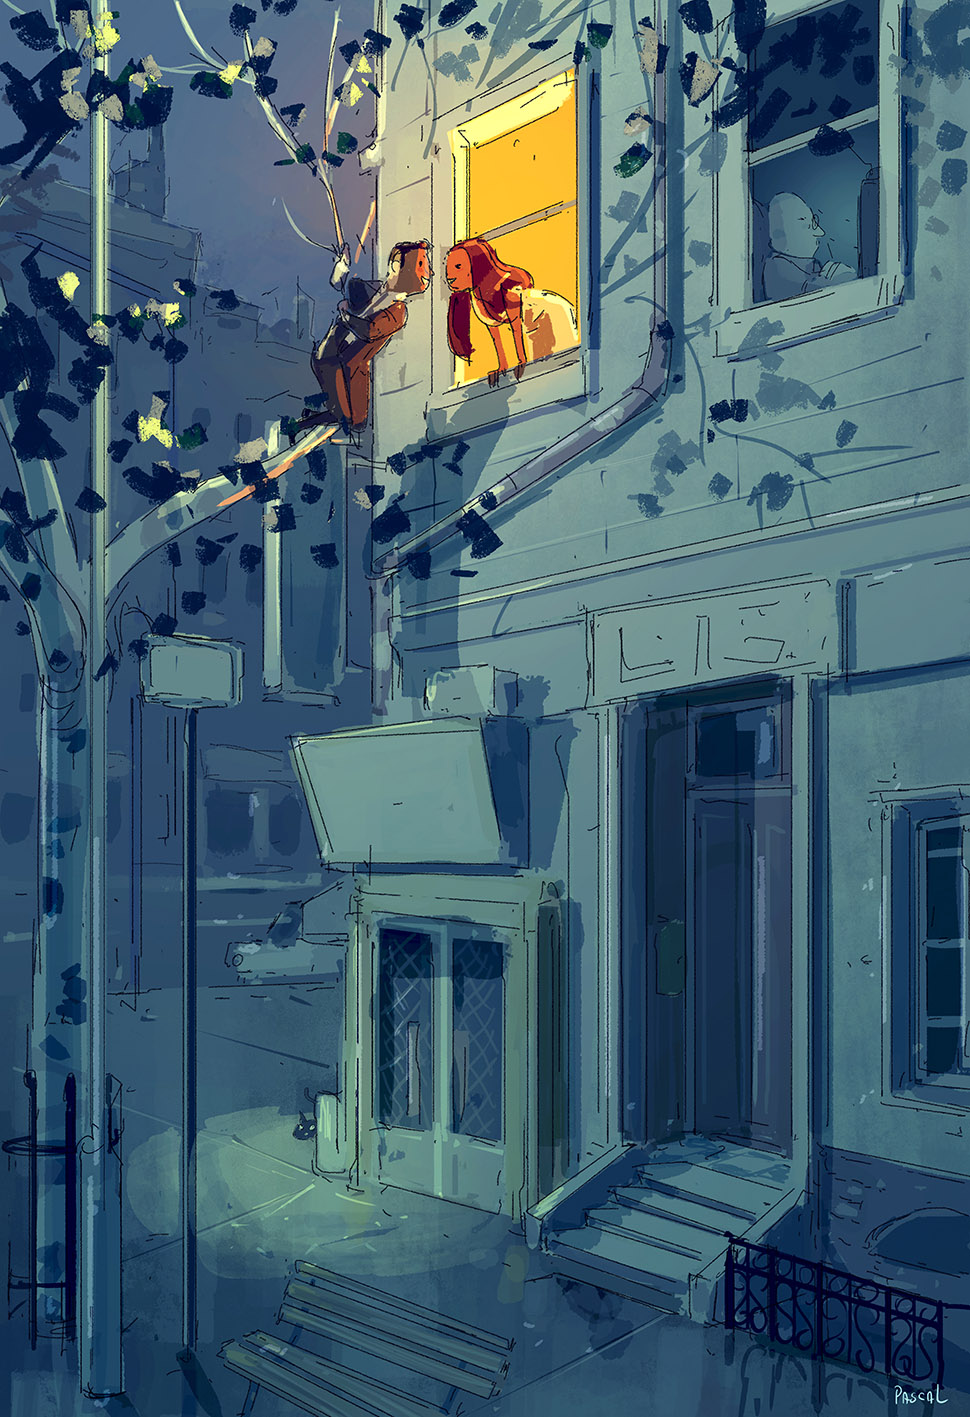 pascal campion: I was just in the neighborhood....